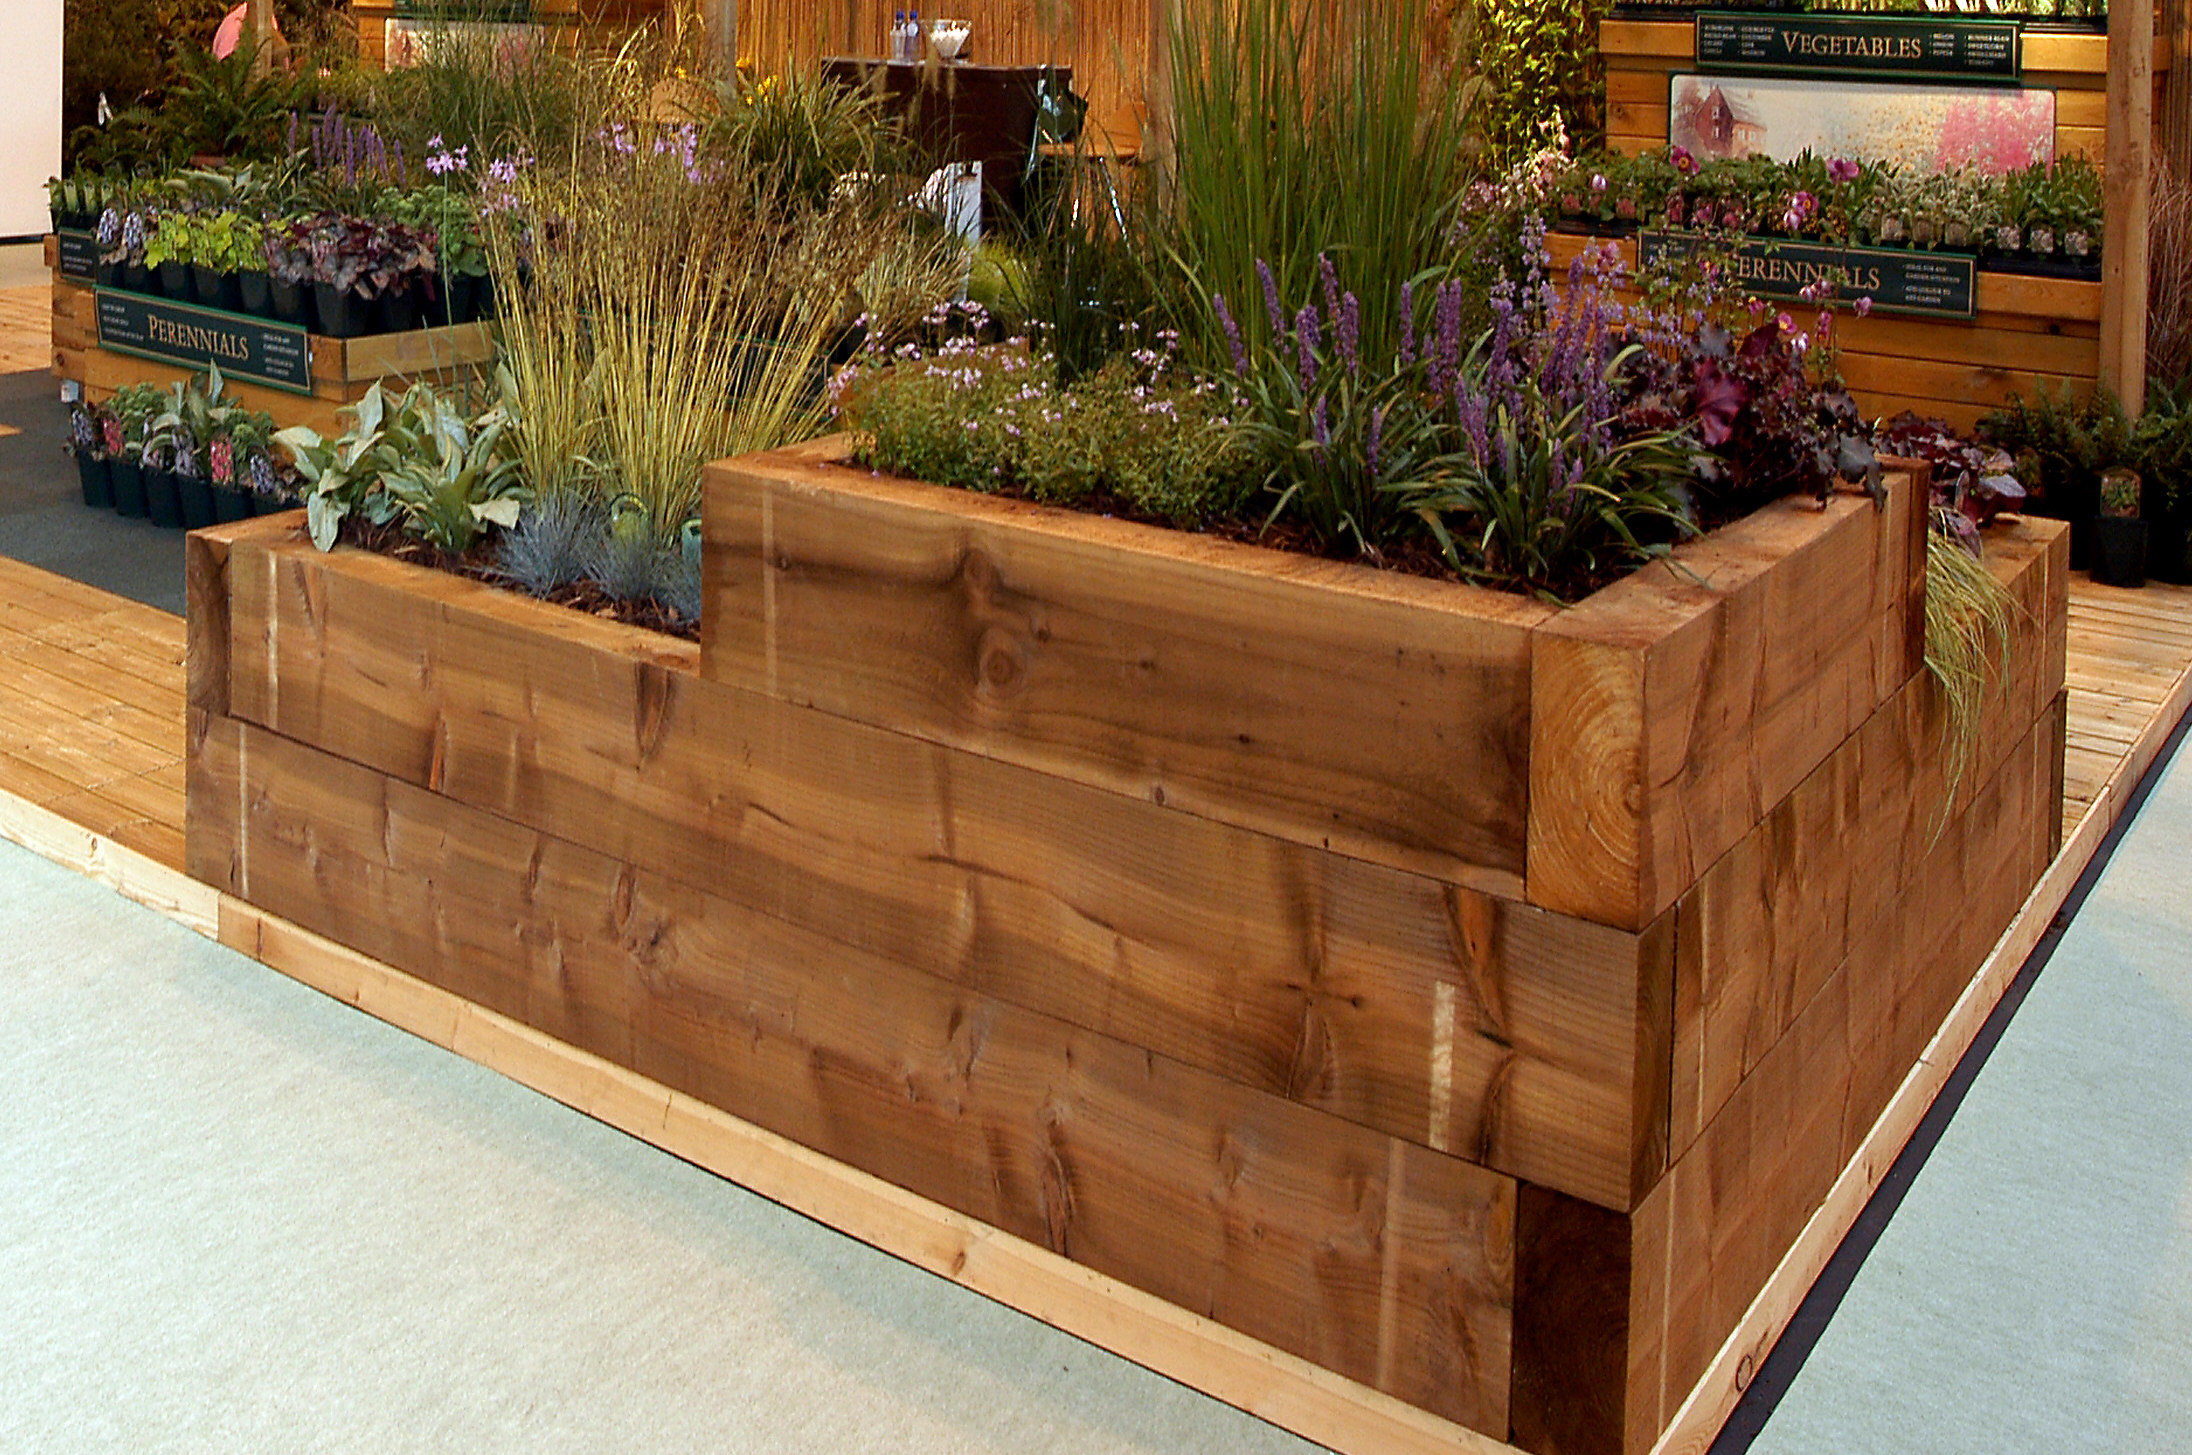 Wooden planter with plants